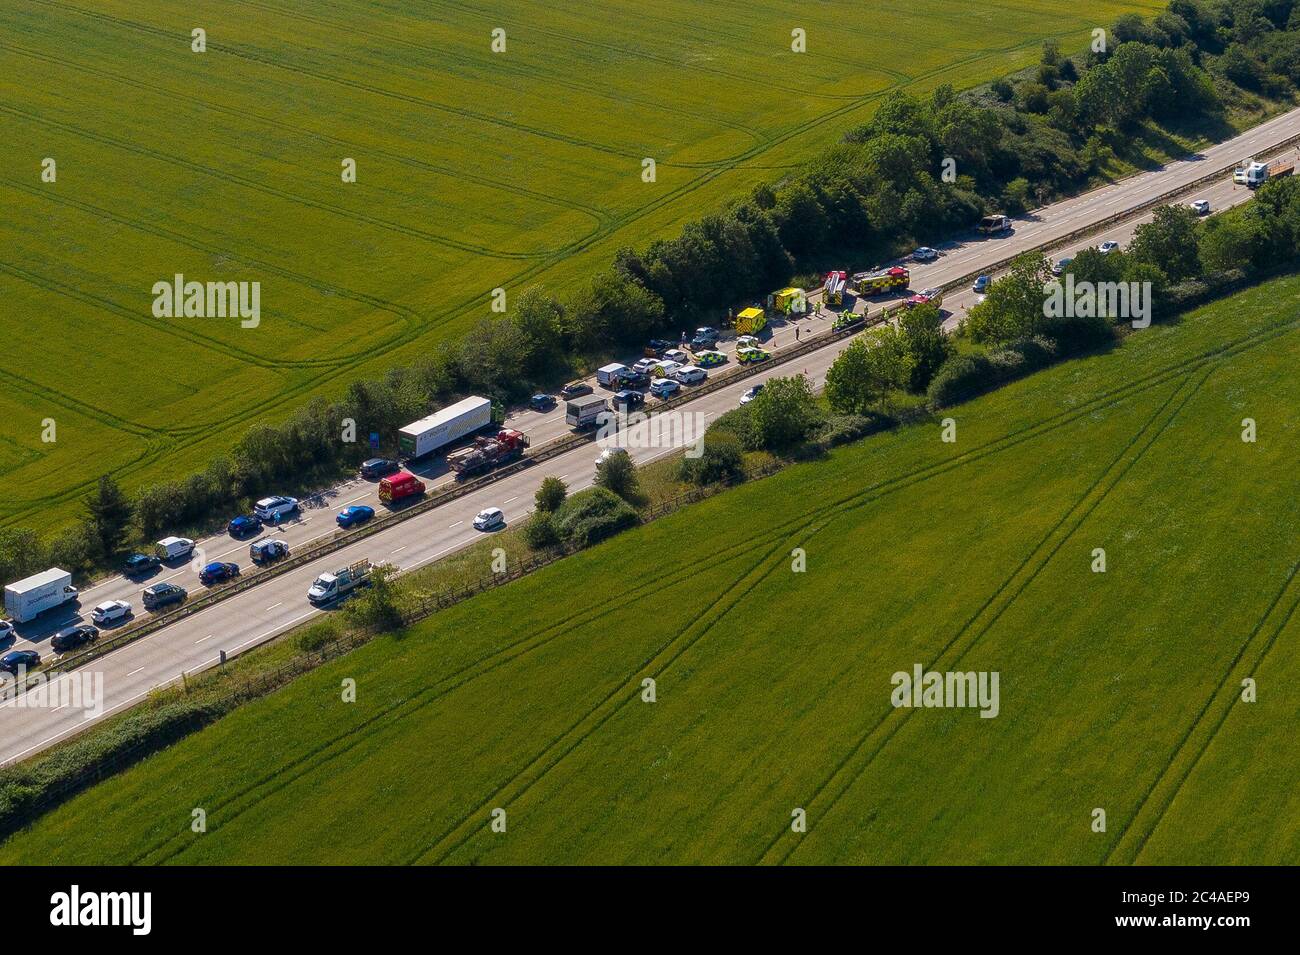 Essex, UK. Accident shuts A12 between junctions 16 and 16 causing huge tailbacks. A car appears to have struck the central reservation. Emergency services are on scene. Ricci Fothergill/Alamy Live News Stock Photo